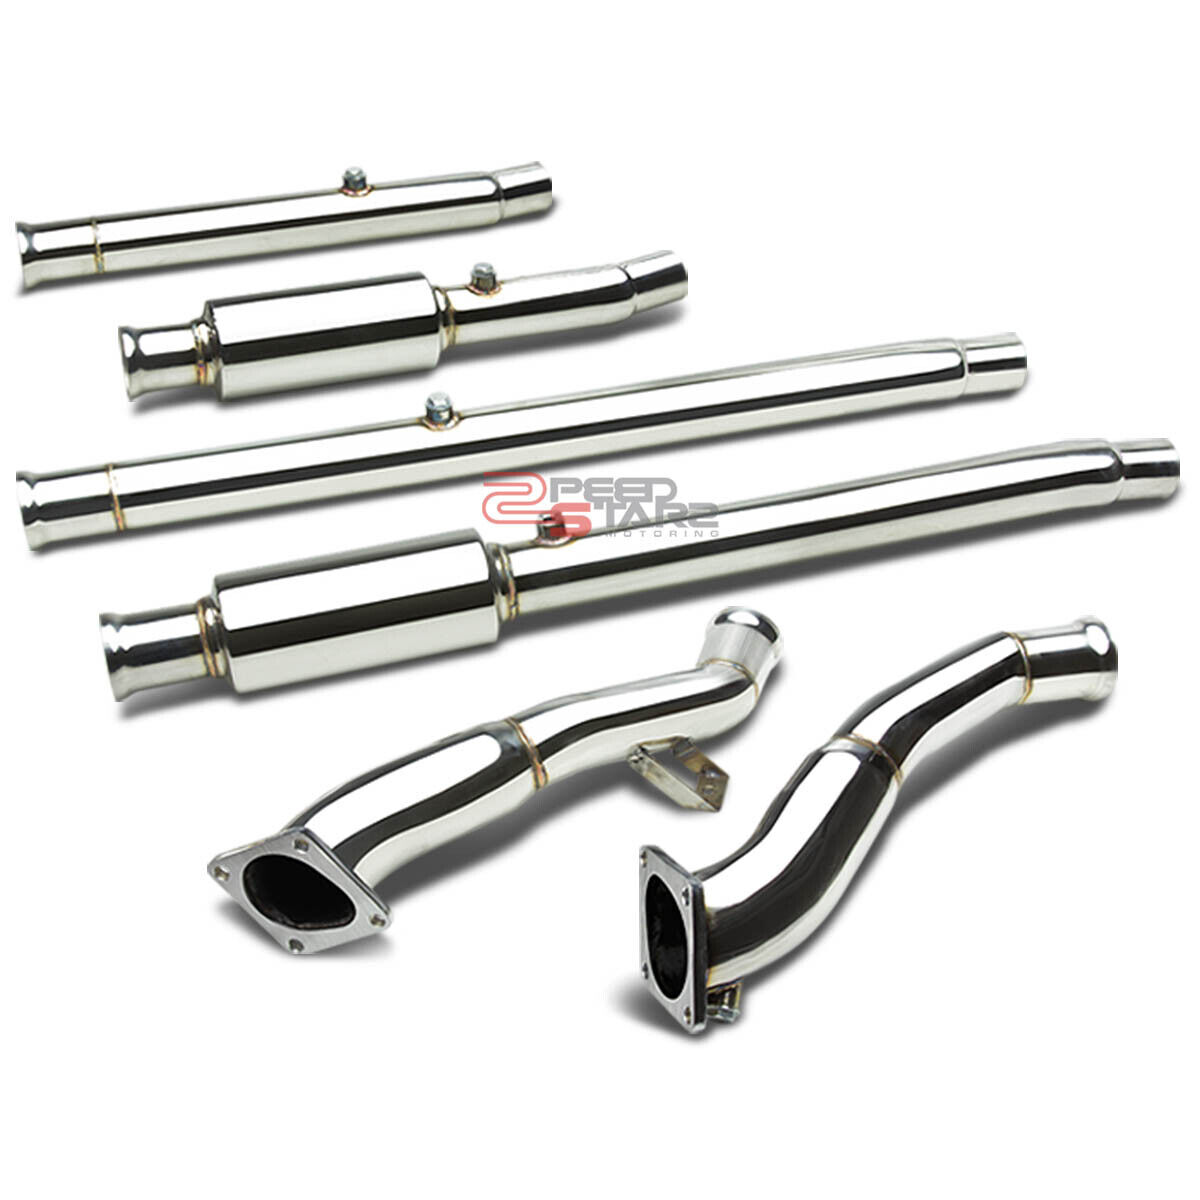 AUDI S4 B5/A6 C5 QUATTRO 2.7L TURBO STAINLESS CHROME DOWNPIPE+GASKET+BOLTS+CLAMP